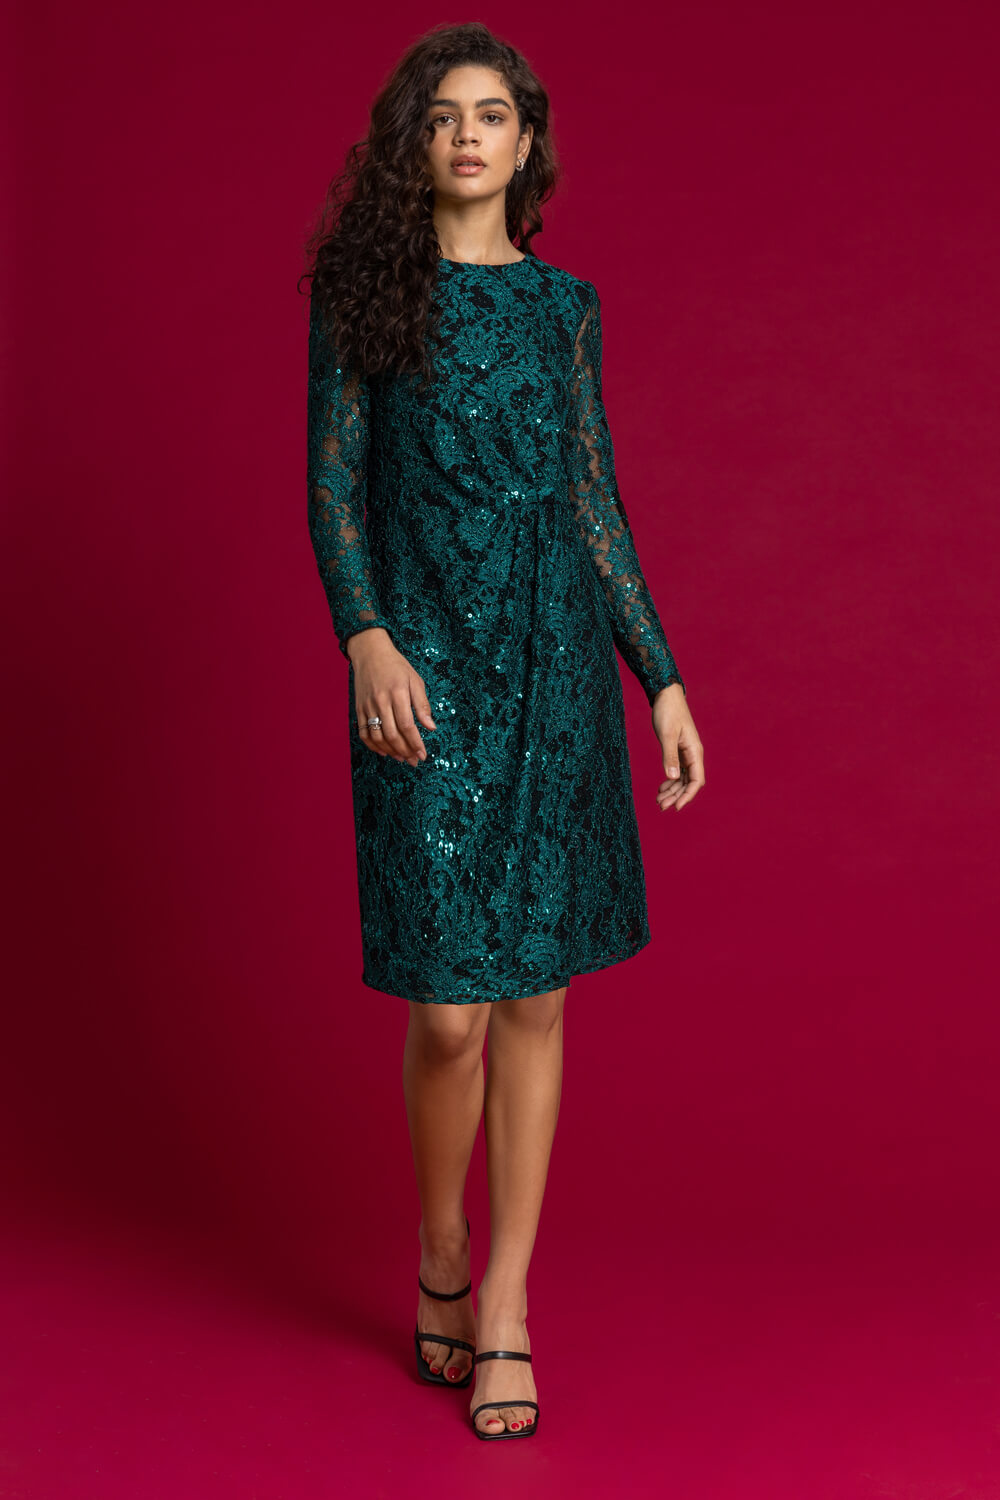 Teal Sequin Ruched Lace Wrap Dress, Image 3 of 5